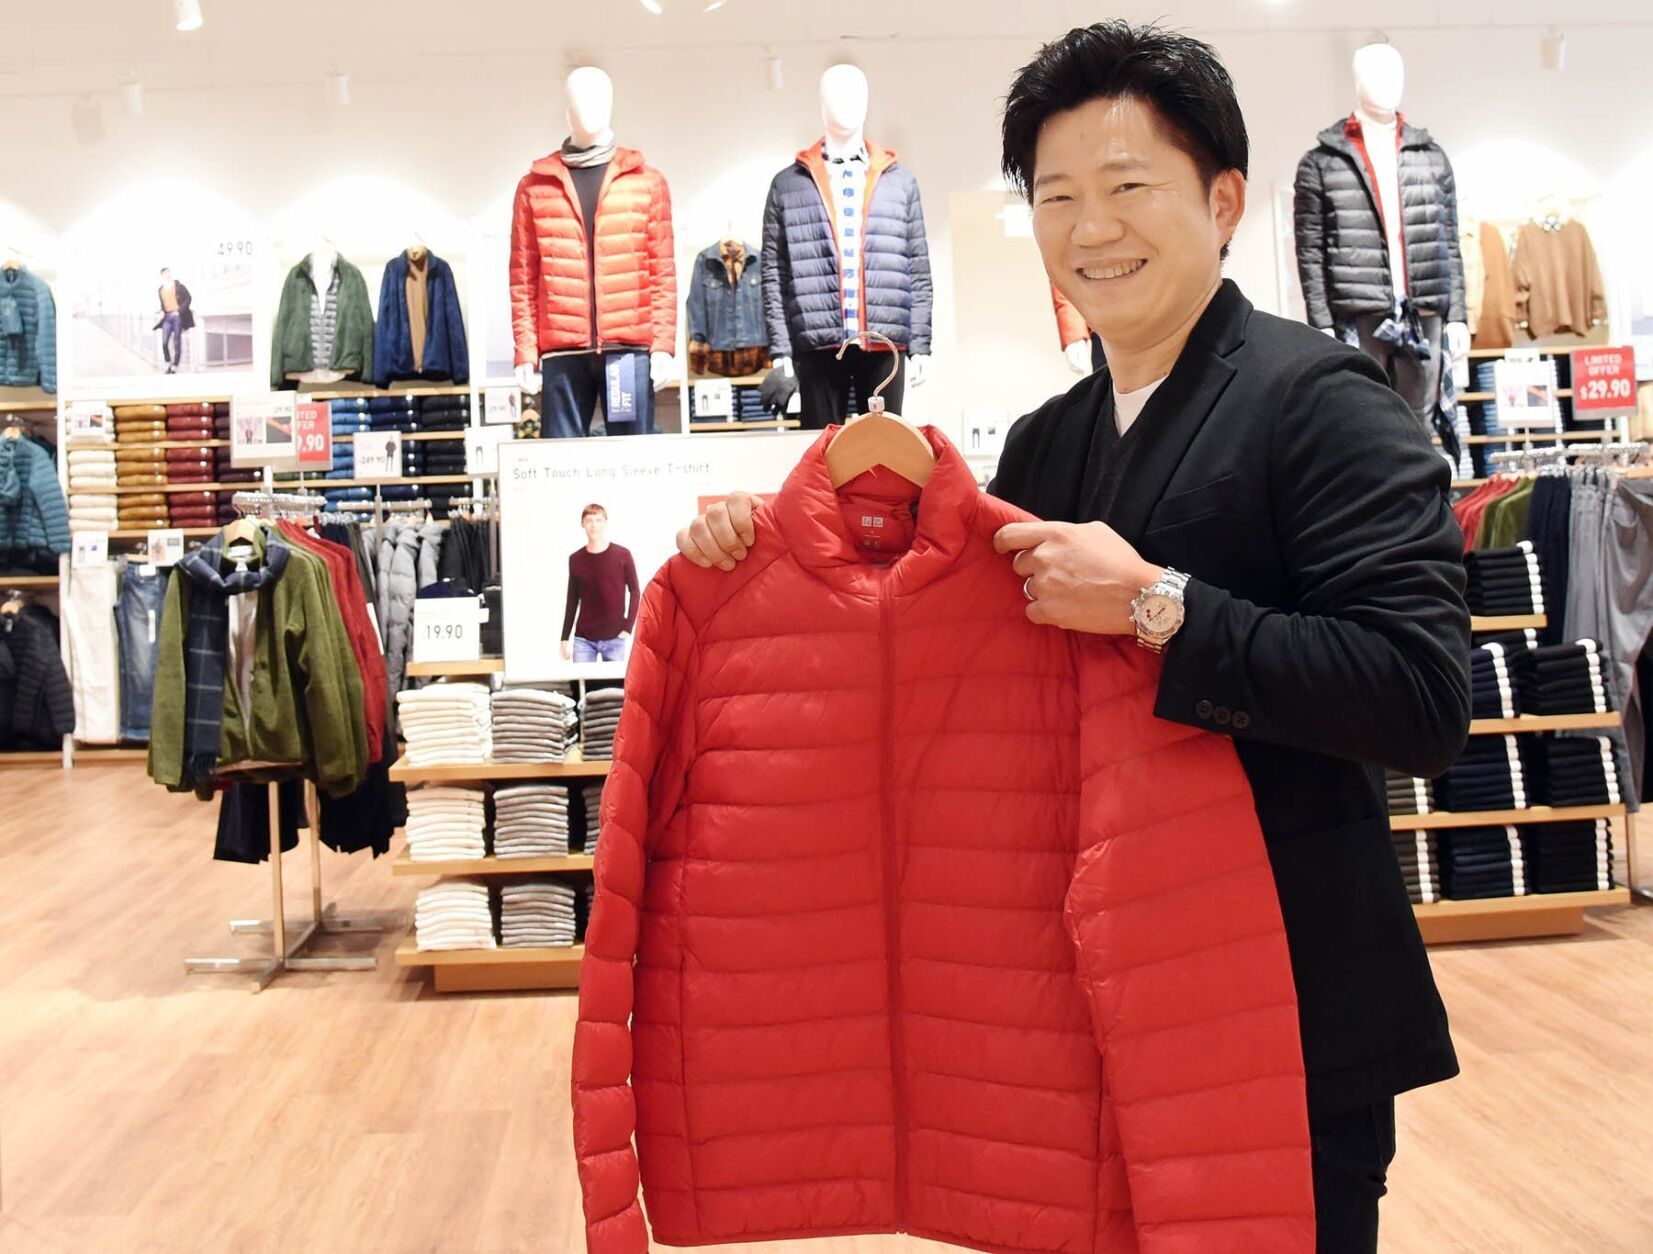 Uniqlo says no forced Xinjiang labor used in making its products  Nikkei  Asia